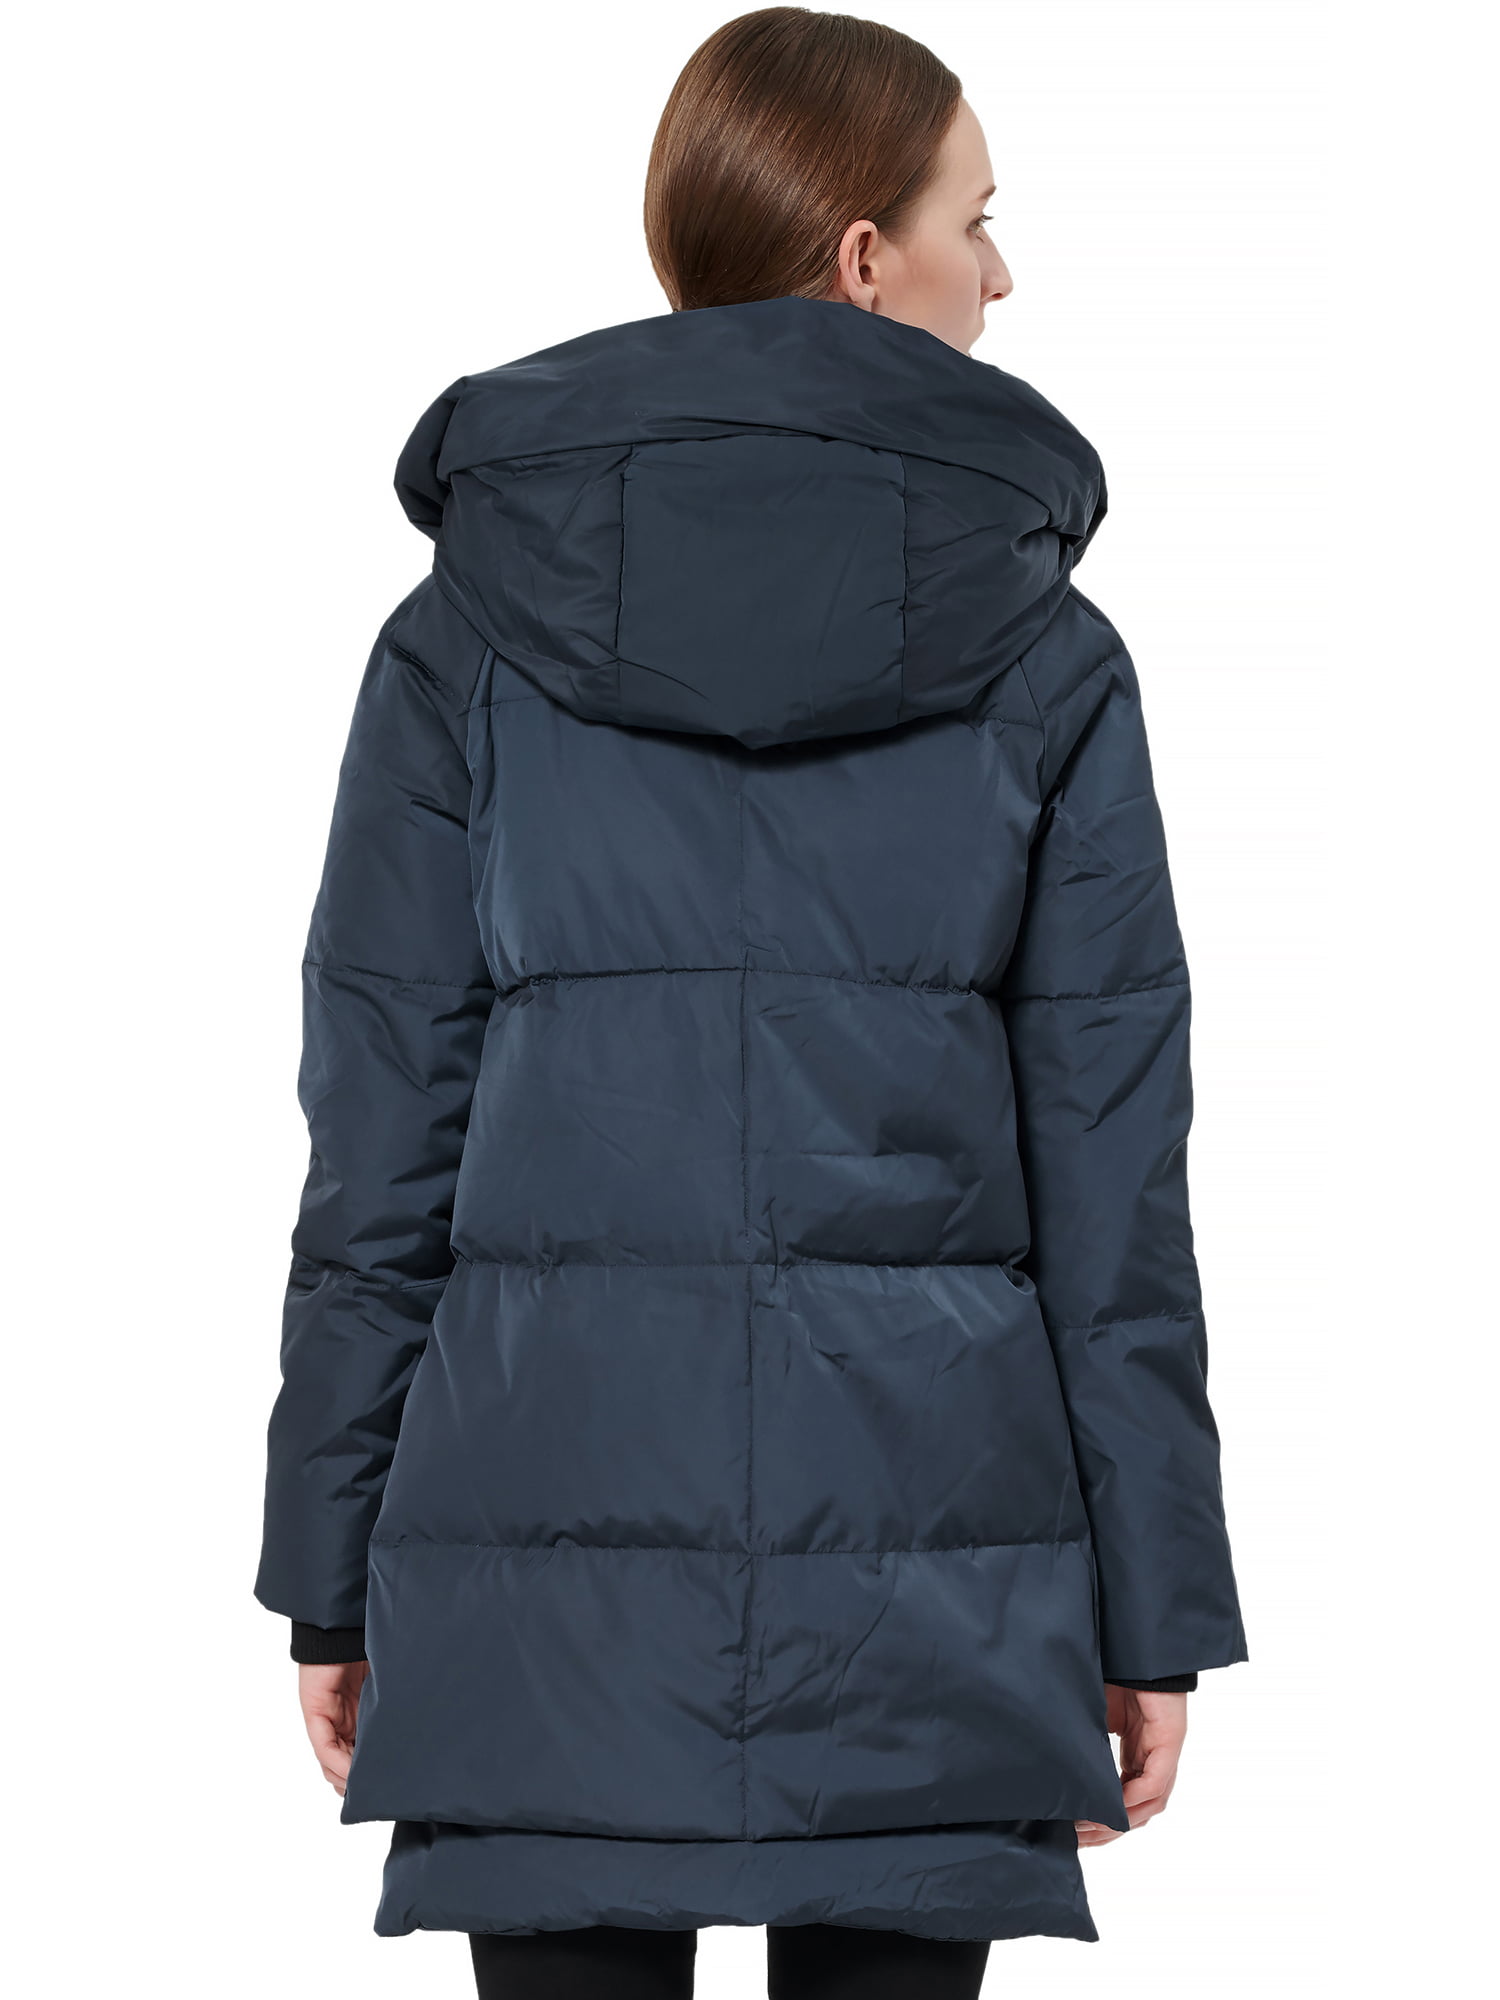 Airmiuu Women's Hooded Down Jacket Winter Thicken Warm Puffer Jacket Coat Mid-Length 